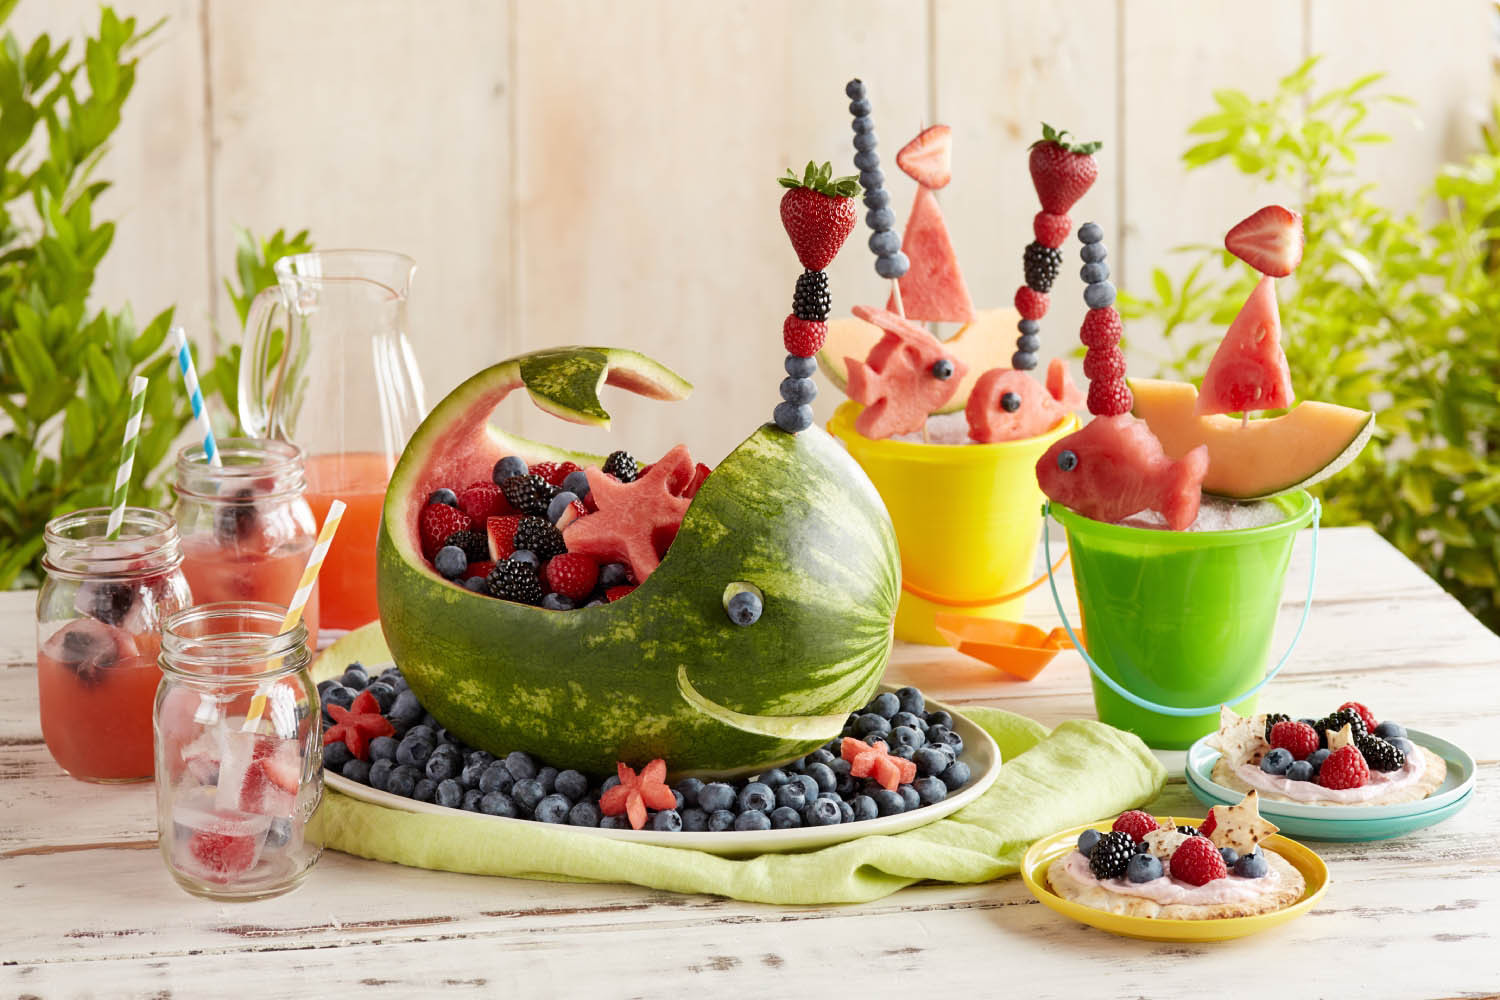 Beach Food Party Ideas
 Splash into Summer with a Berry Beach Party